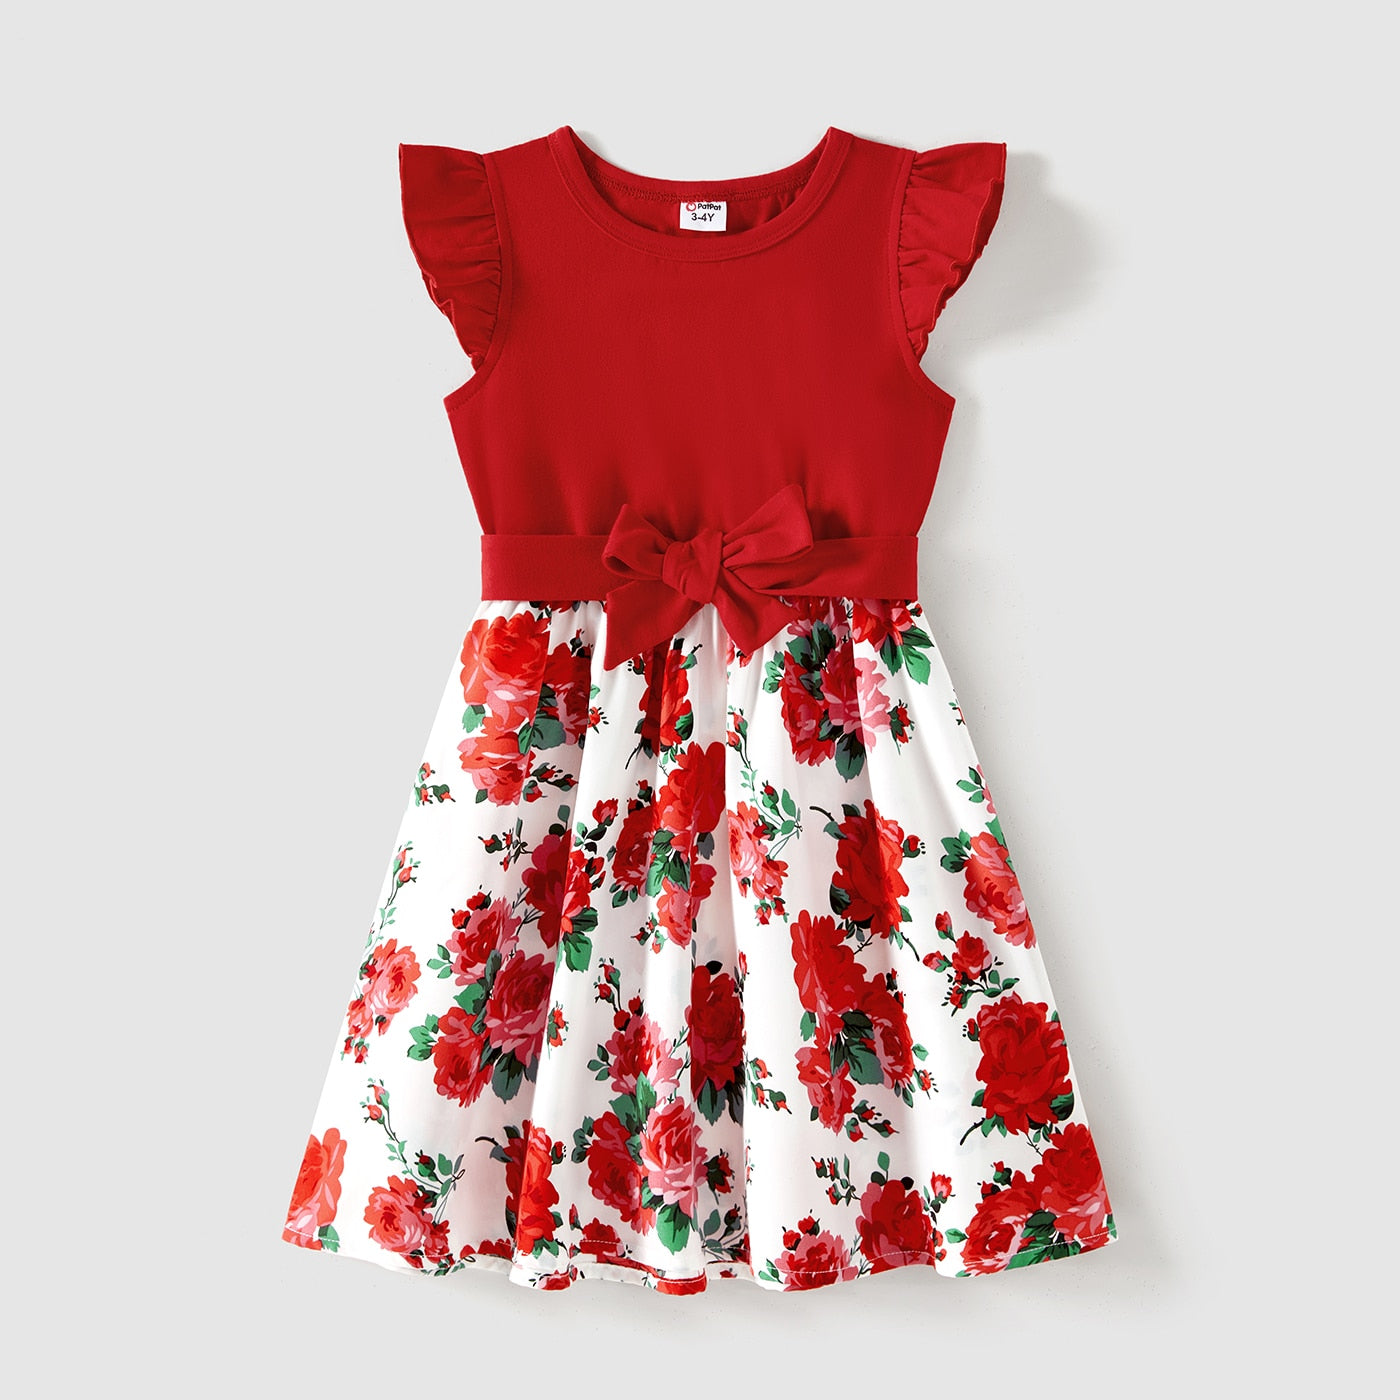 PatPat Family Matching Outfits 95% Cotton Short-sleeve Colorblock T-shirts and Floral Print Spliced Dresses Sets